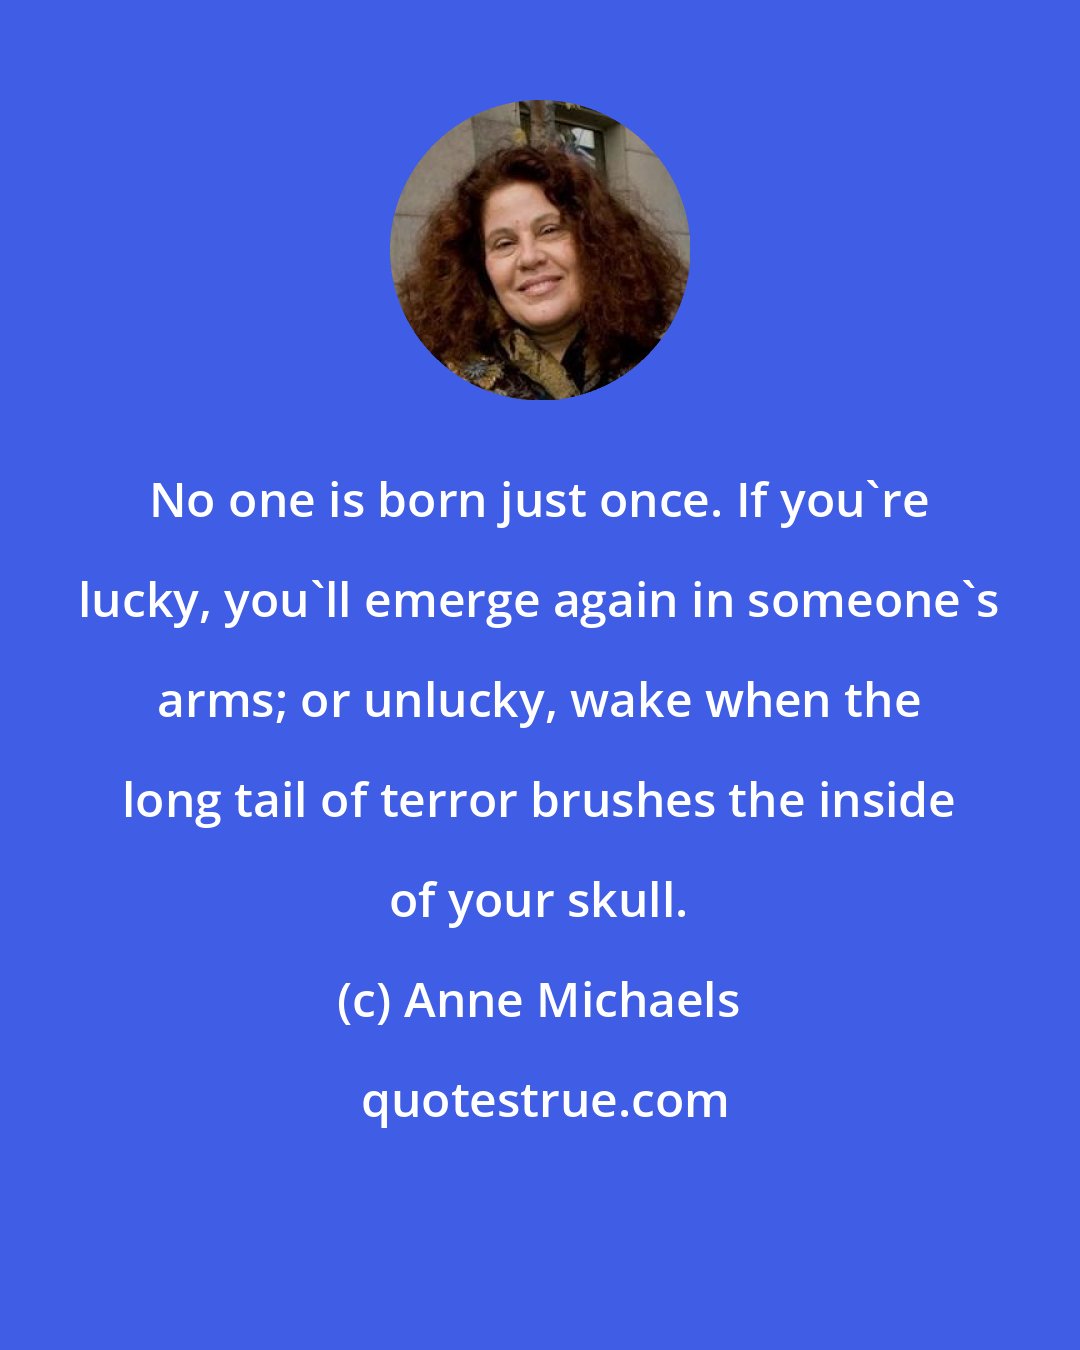 Anne Michaels: No one is born just once. If you're lucky, you'll emerge again in someone's arms; or unlucky, wake when the long tail of terror brushes the inside of your skull.